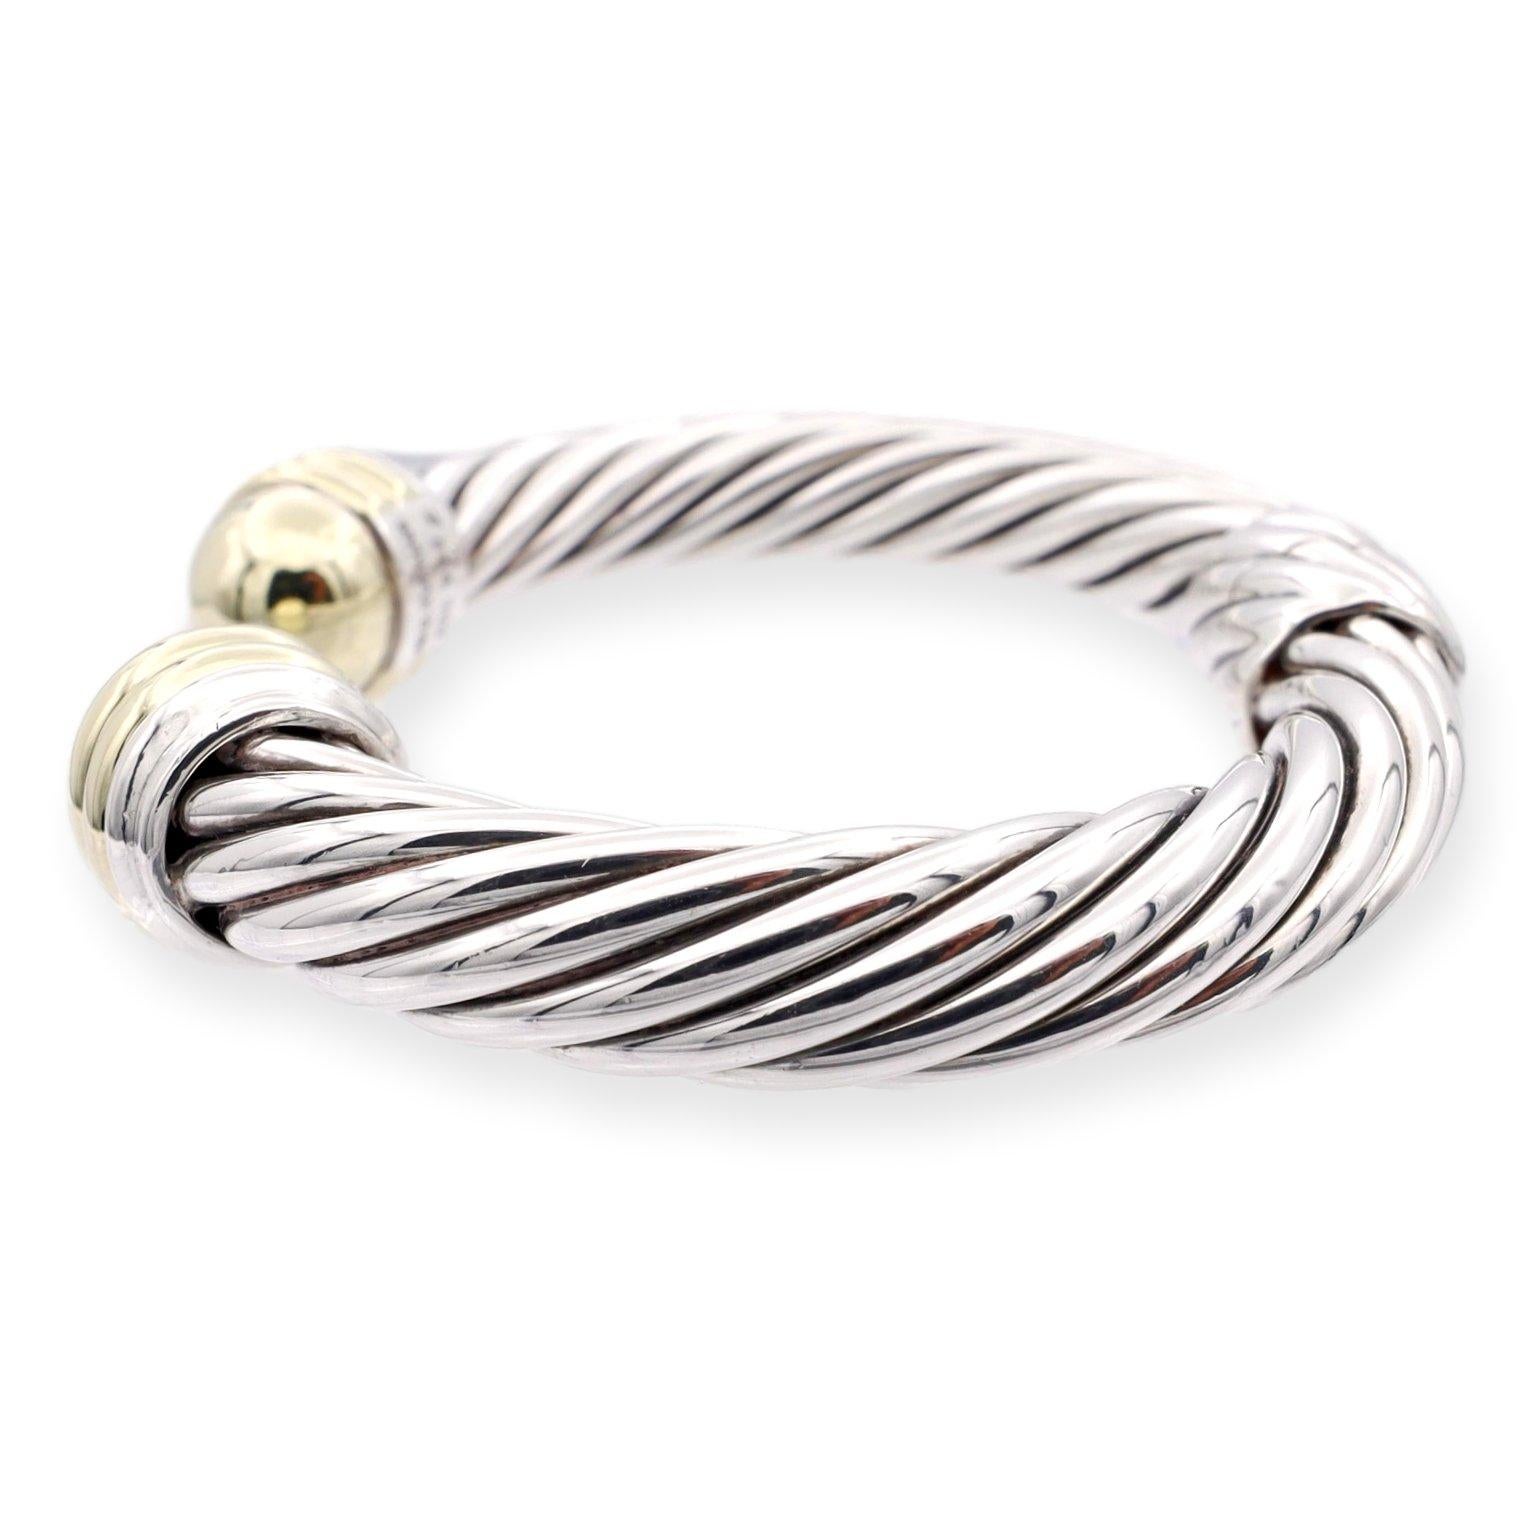 Vintage David Yurman open-cuff bracelet from the the cable classics collection finely crafted in sterling silver featuring two large dome caps at each end in 14 karat yellow gold with a smooth finish and hinged closure for easy slip-on. Bracelet